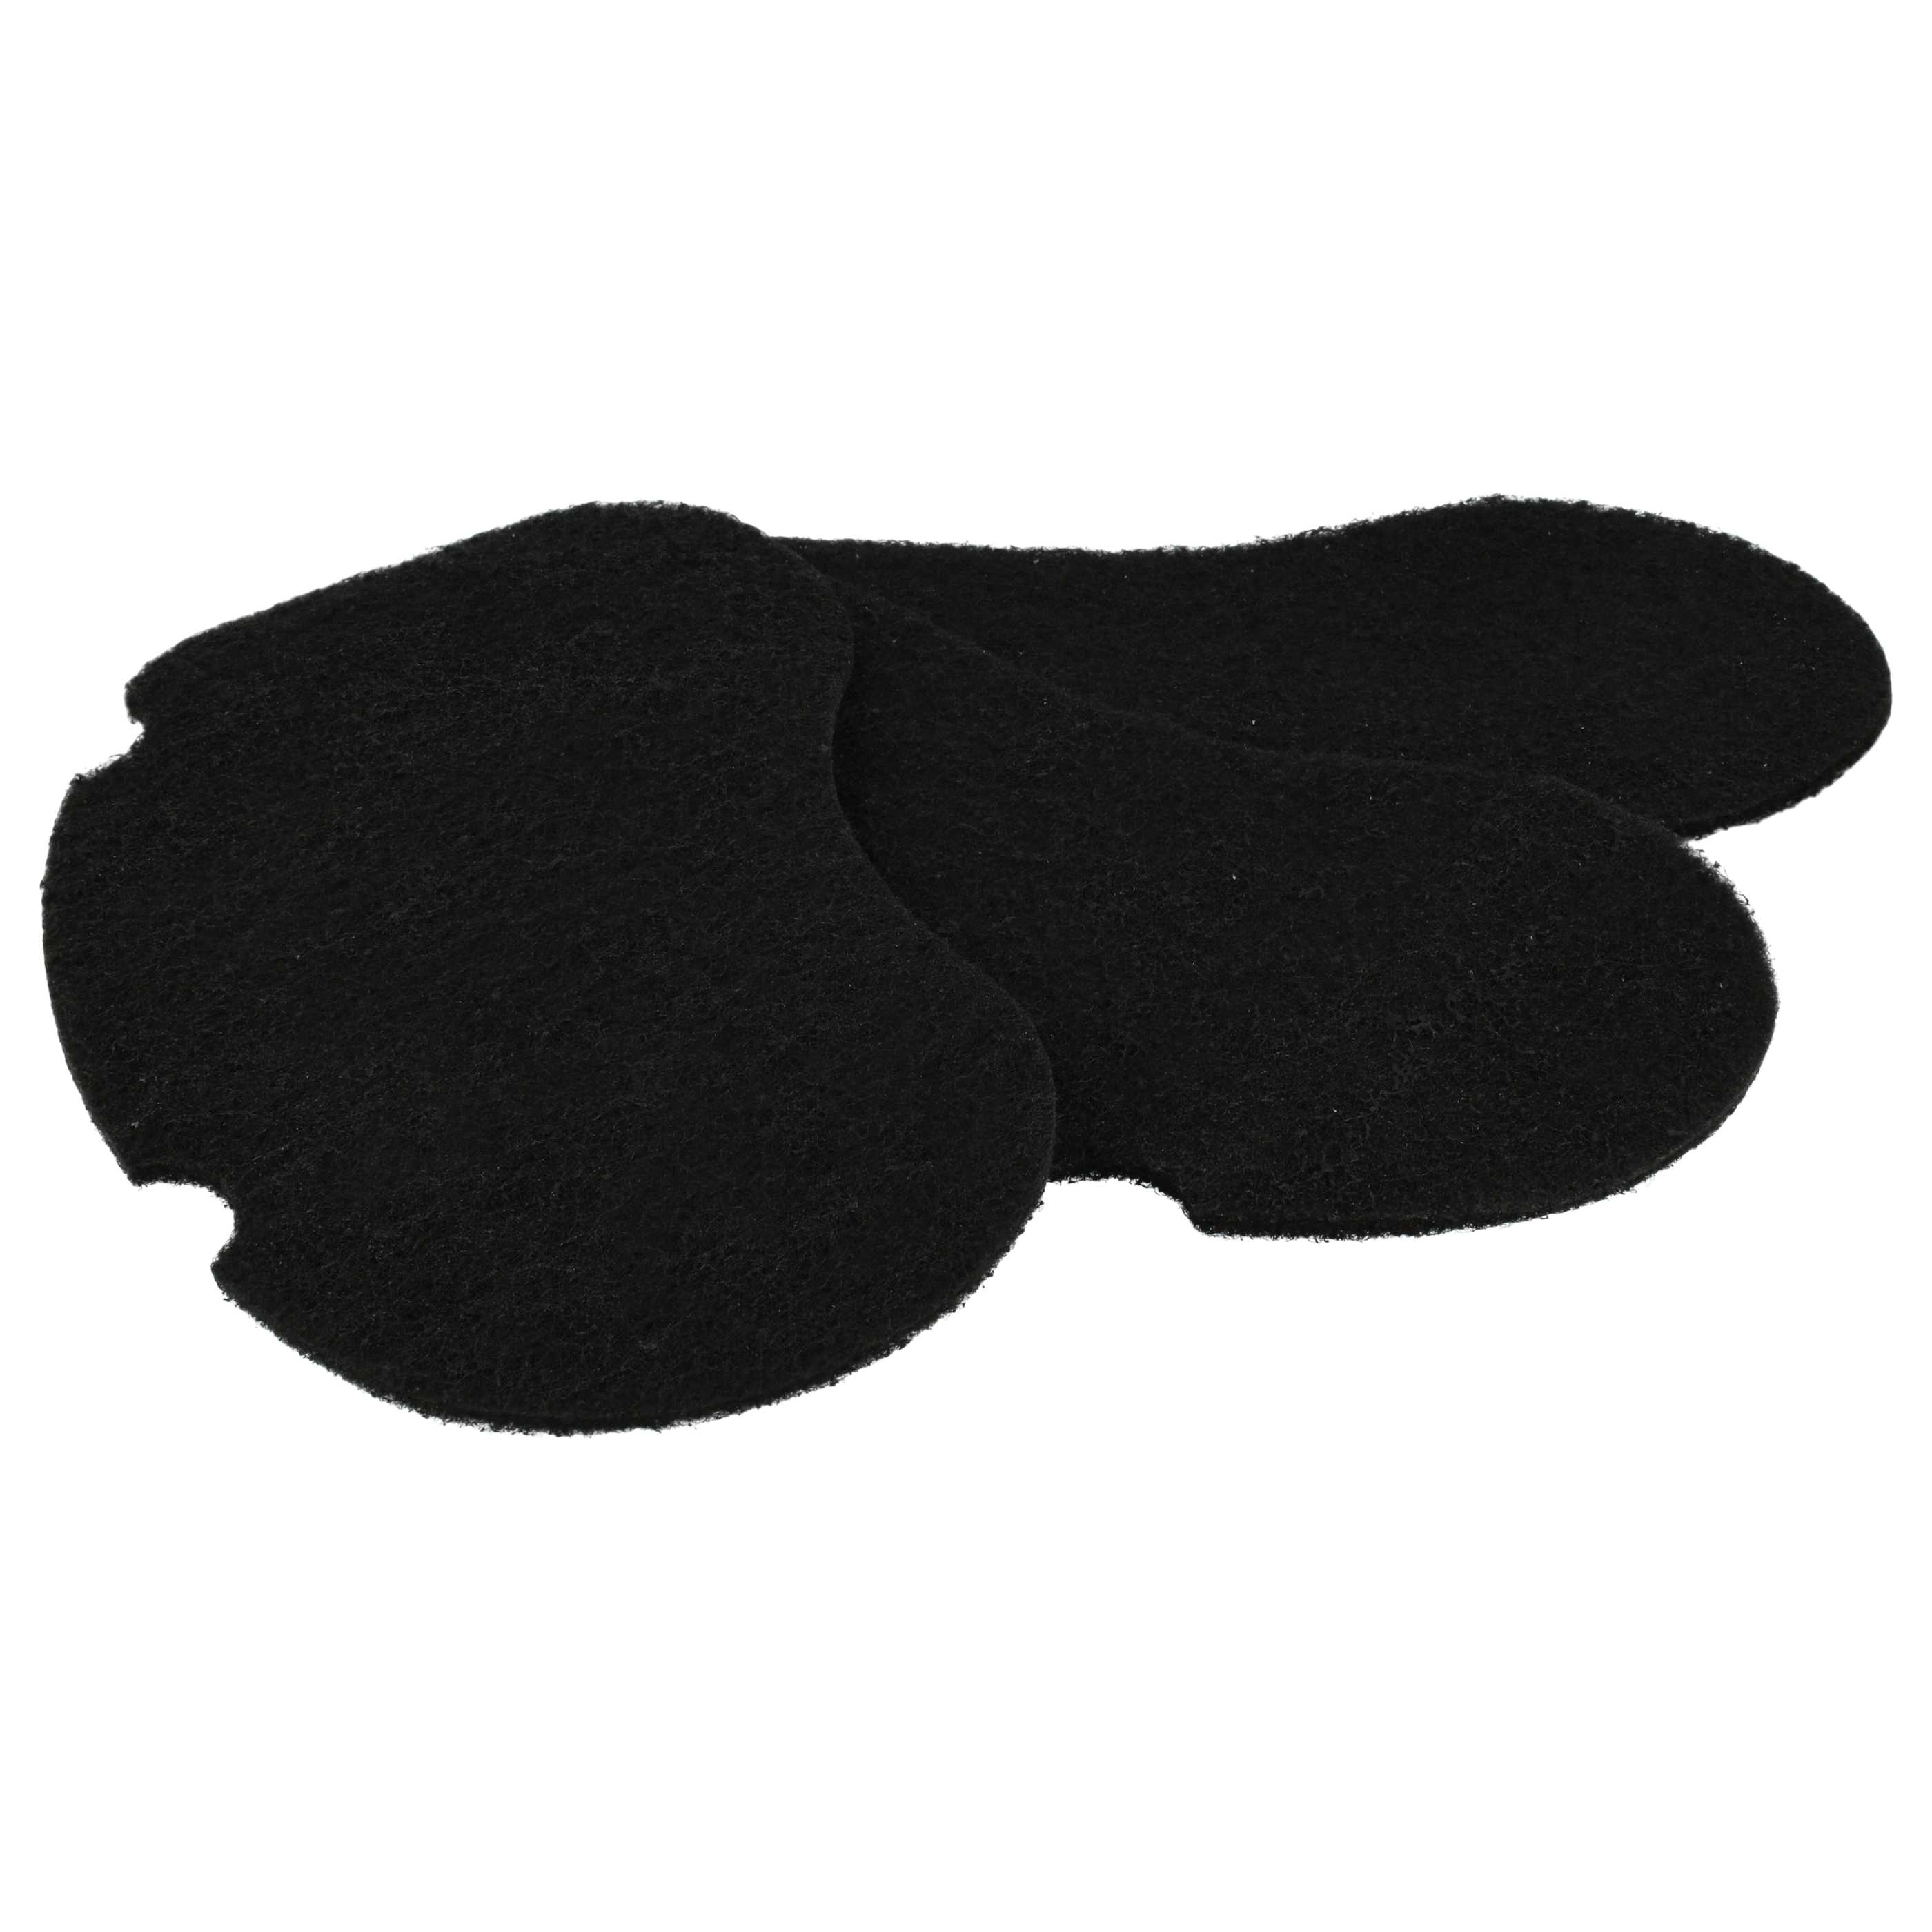 3x Activated Carbon Filter replaces SEB XA500025 for Tefal Deep Fat Fryer etc. - 18.6 x 8.8 x 0.3 cm